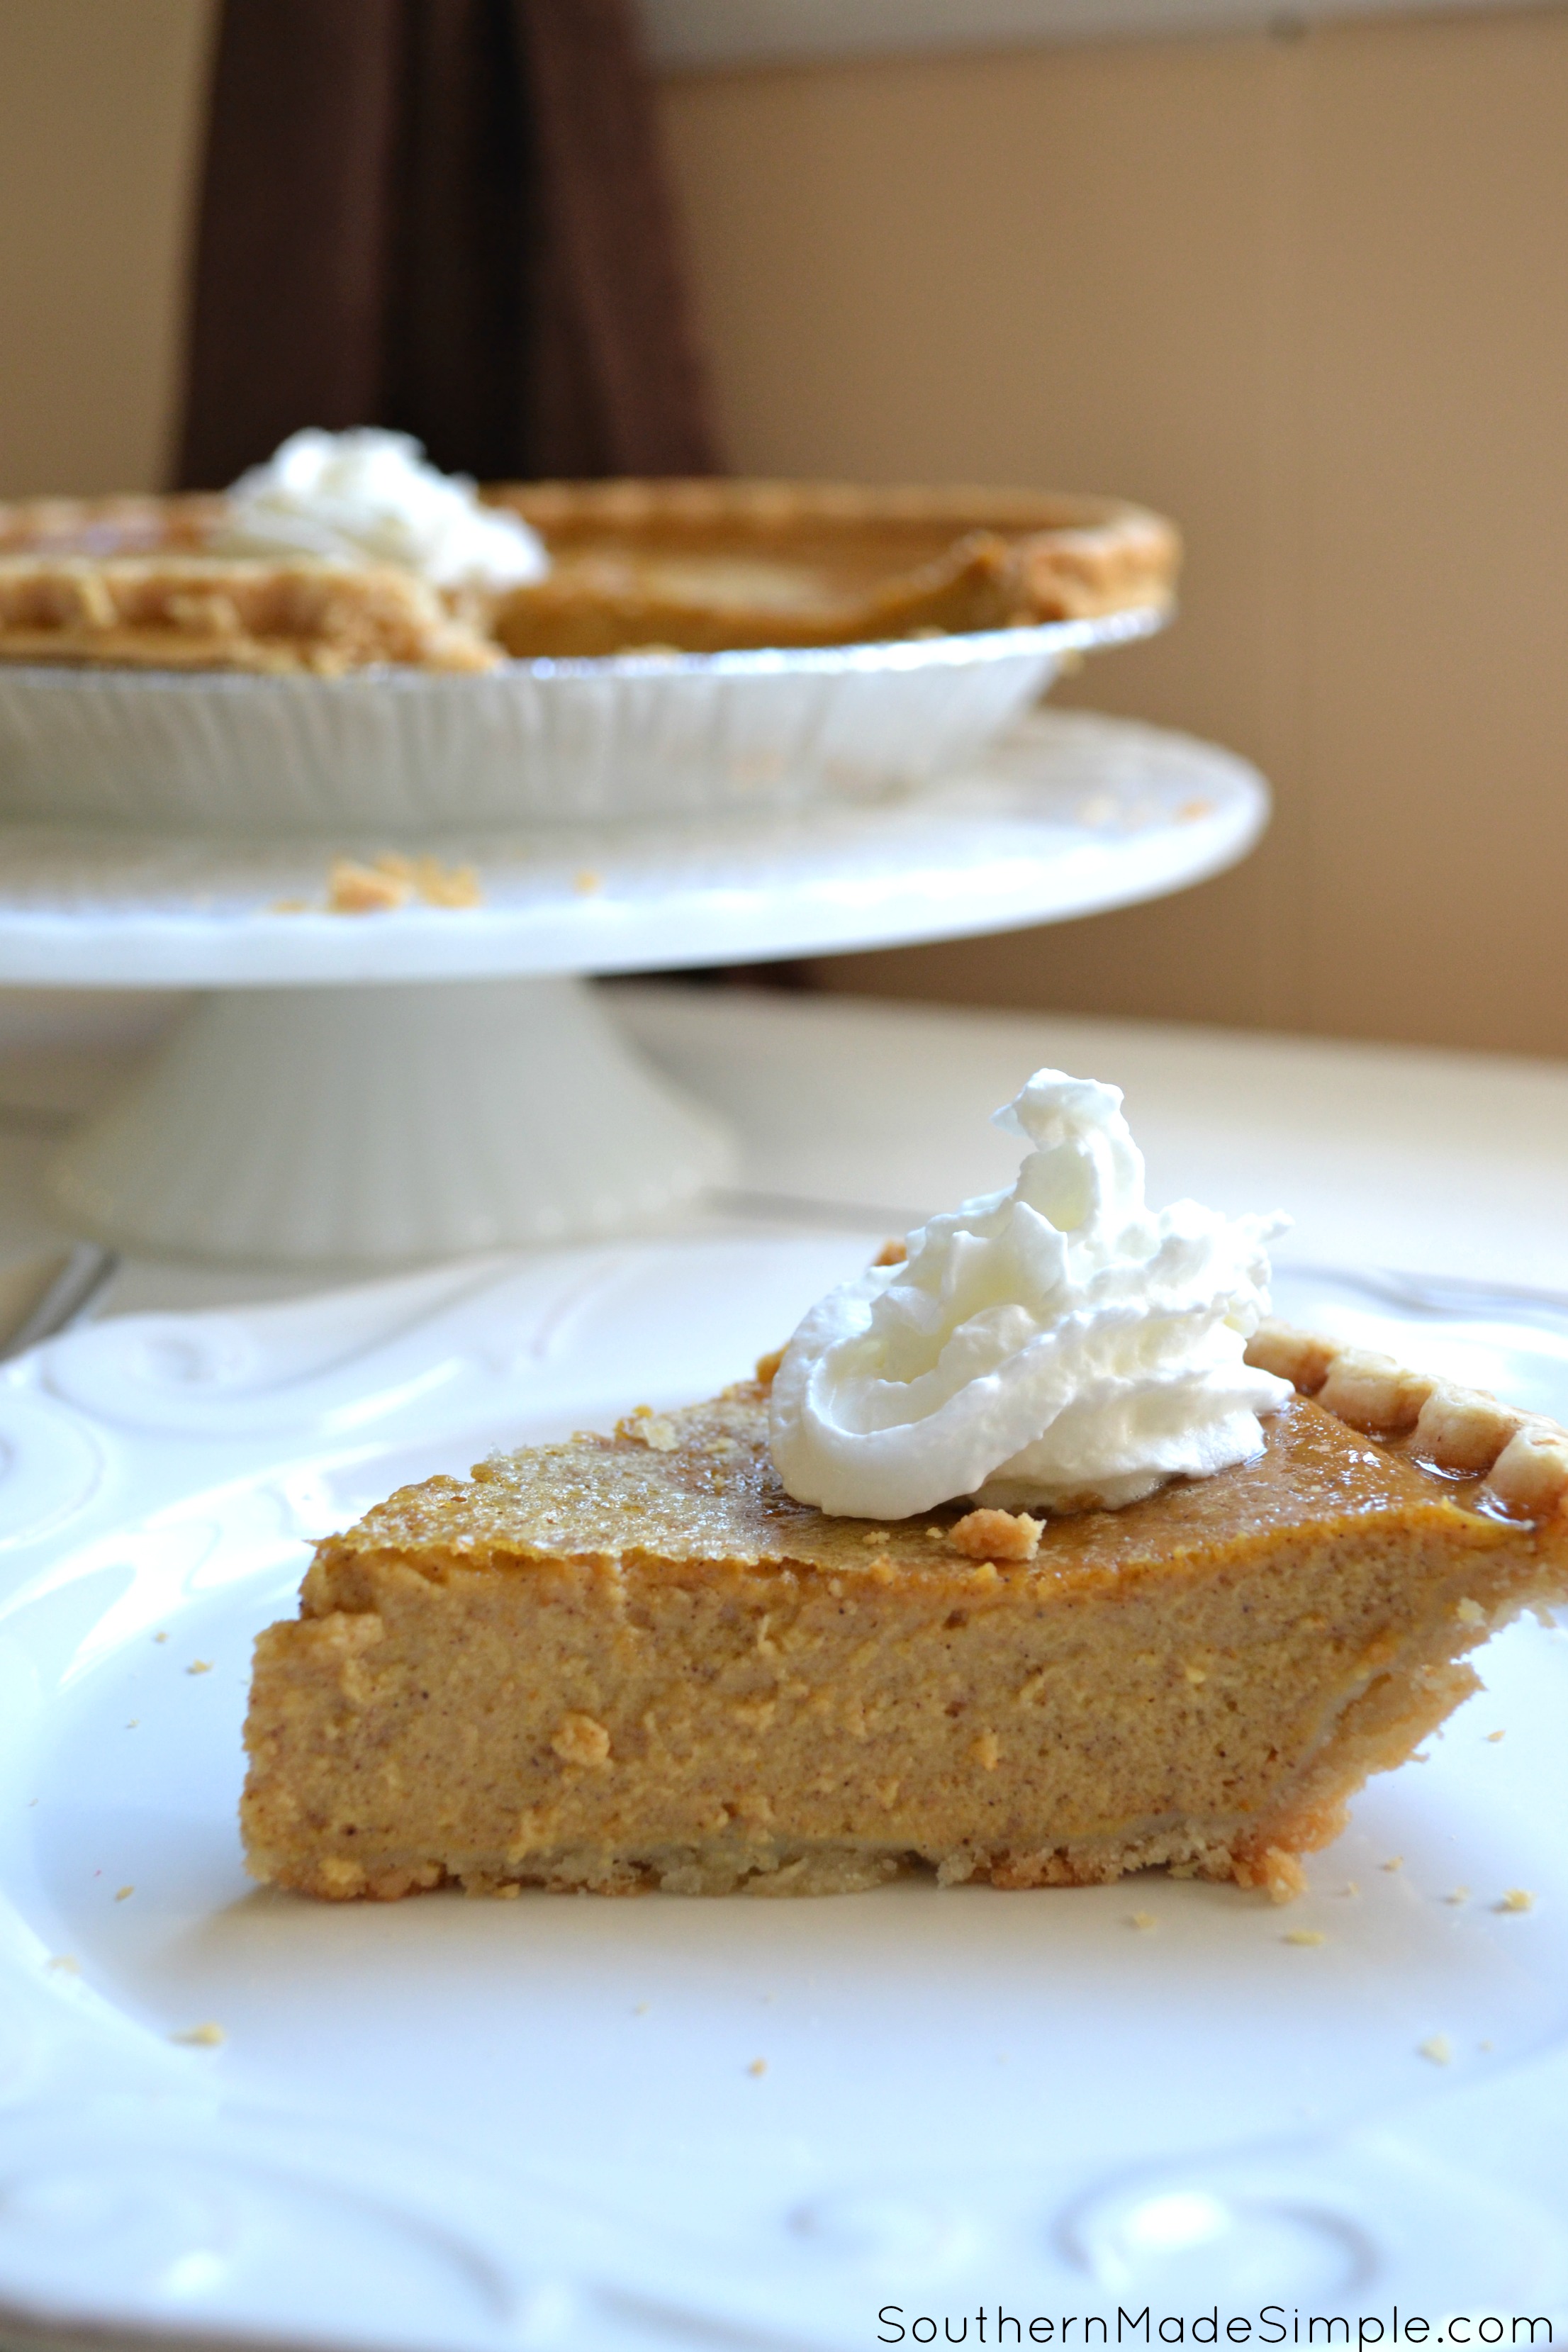 Pumpkin Custard Pie - a delicious twist on everyone's favorite Fall recipe: Pumpkin Pie! This particular pie has a very creamy texture and is perfect with a tall glass of milk!